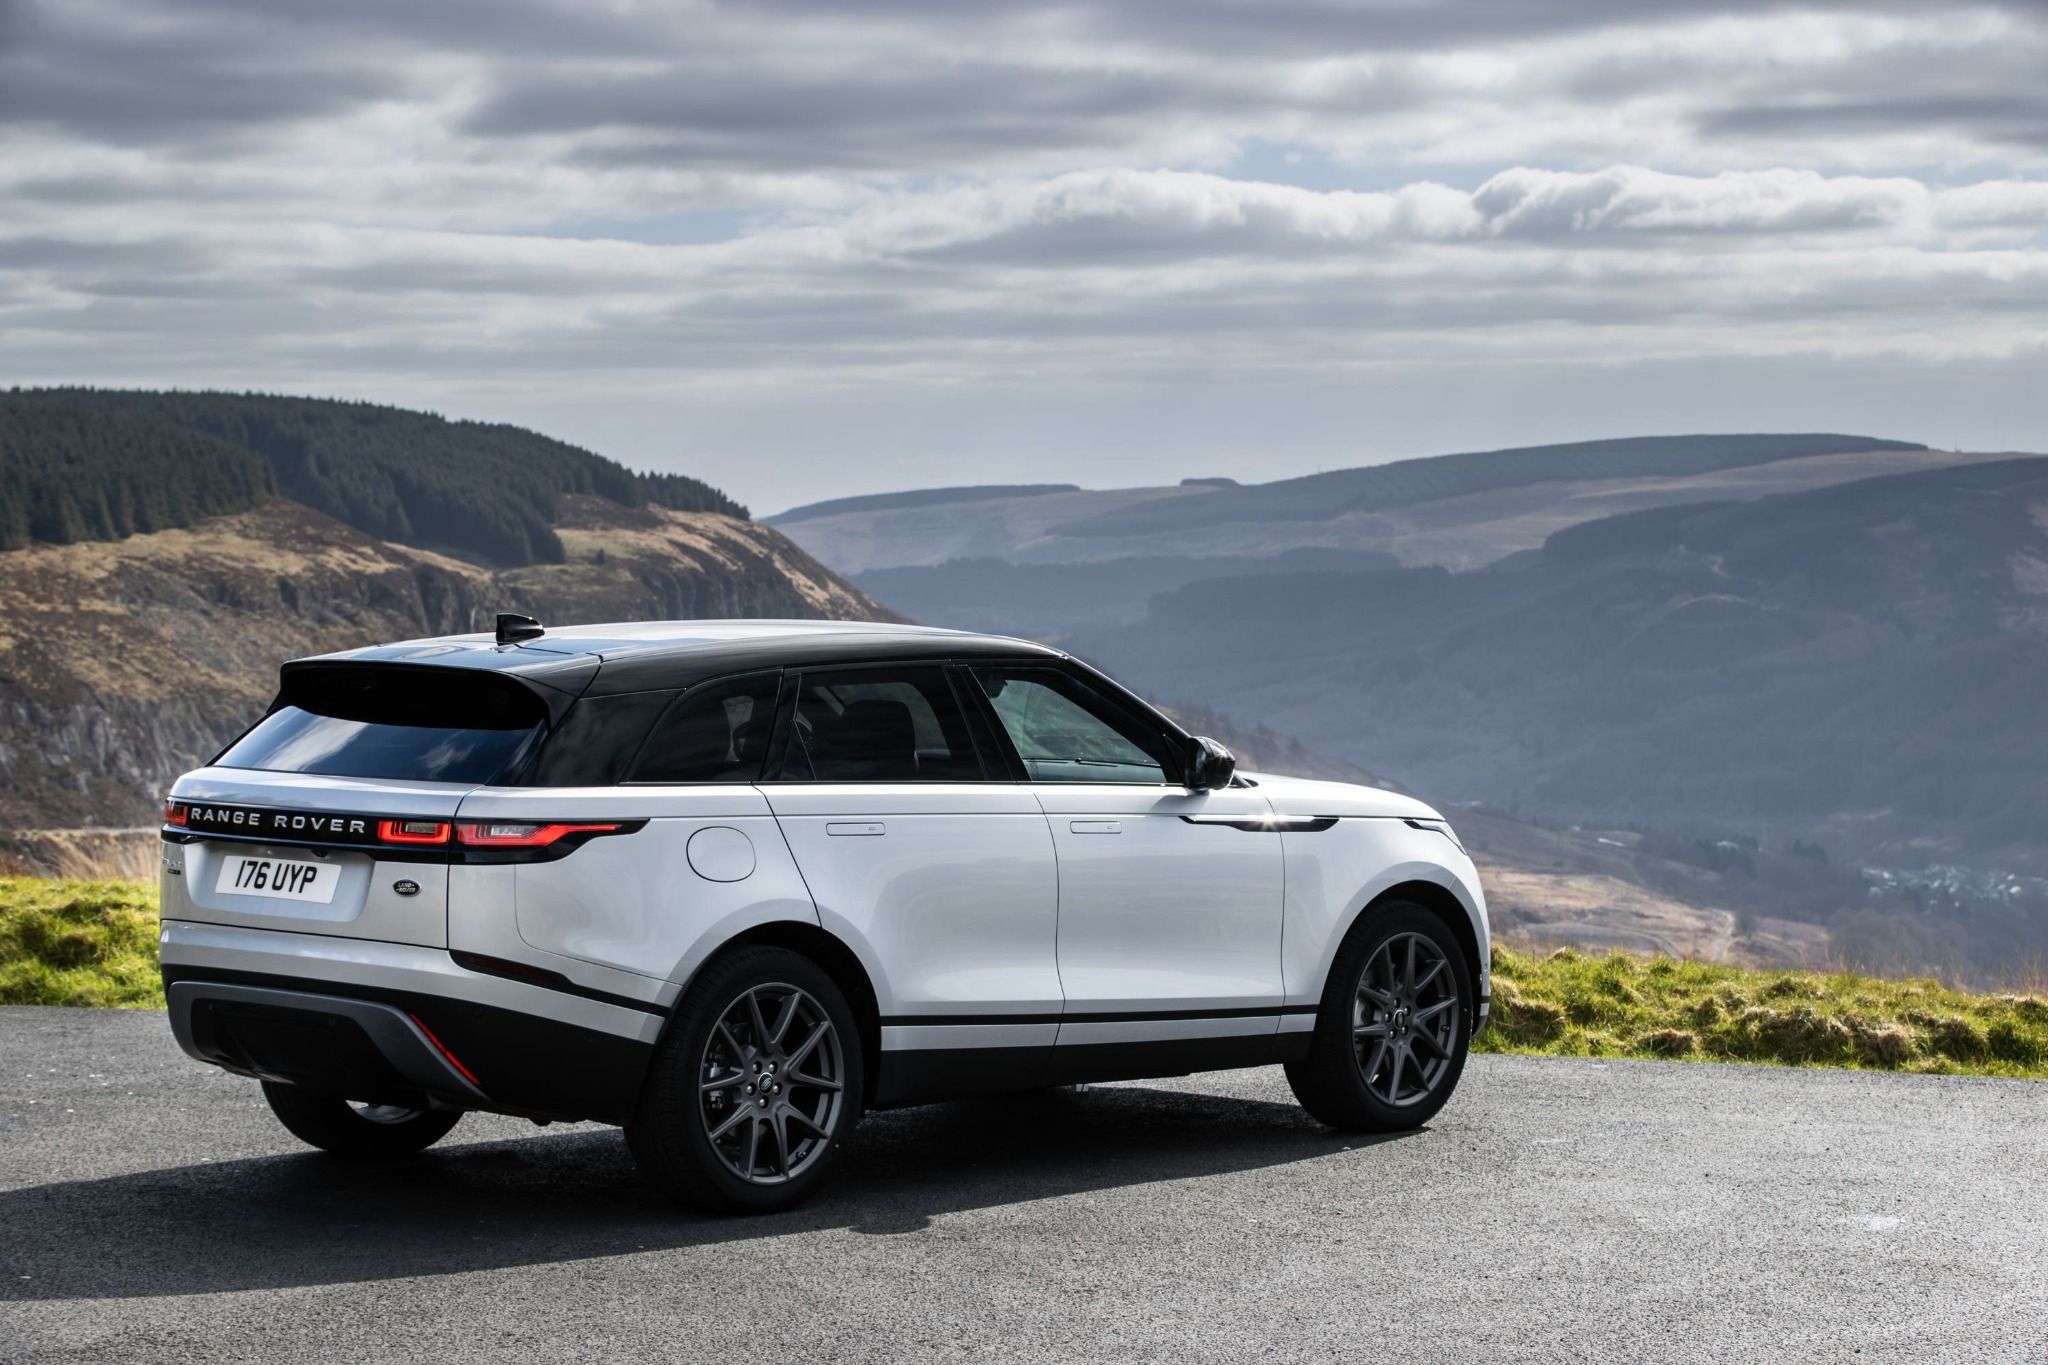 Rear view of a silver Range Rover Velar parked on a cliff